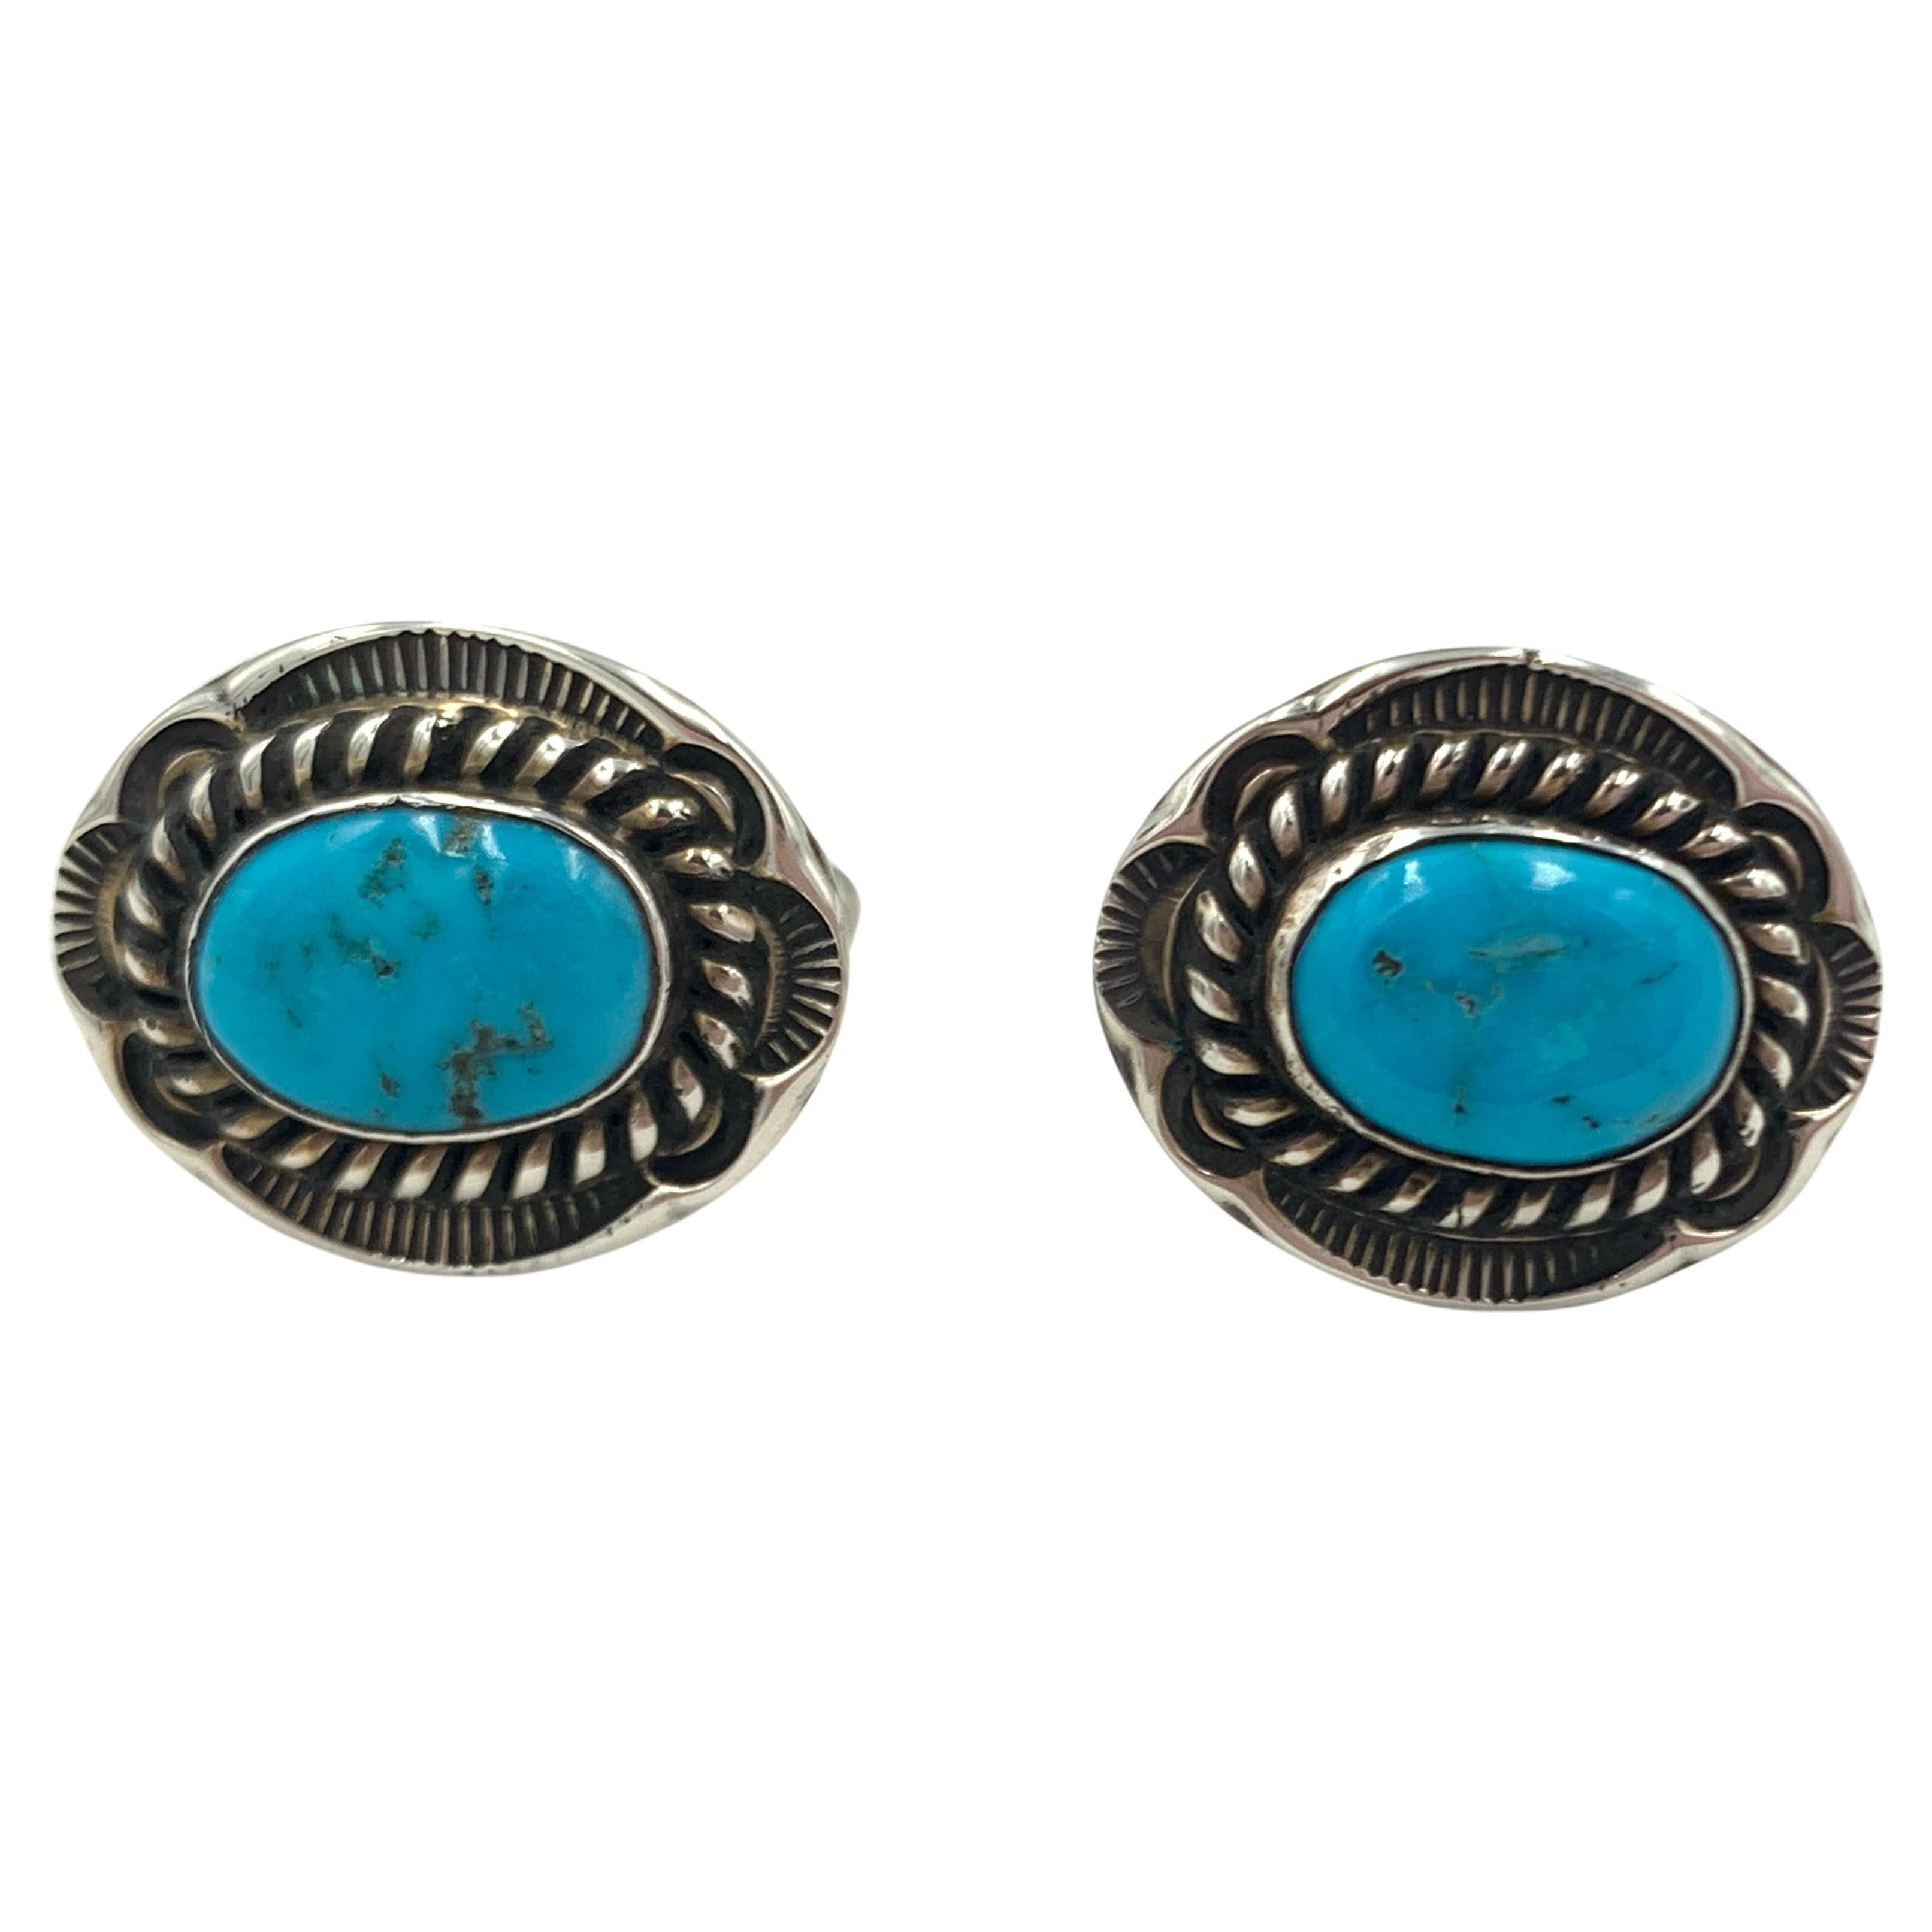 Cuff Links with Kingman Turquoise Gemstone by Dan Oliver 1